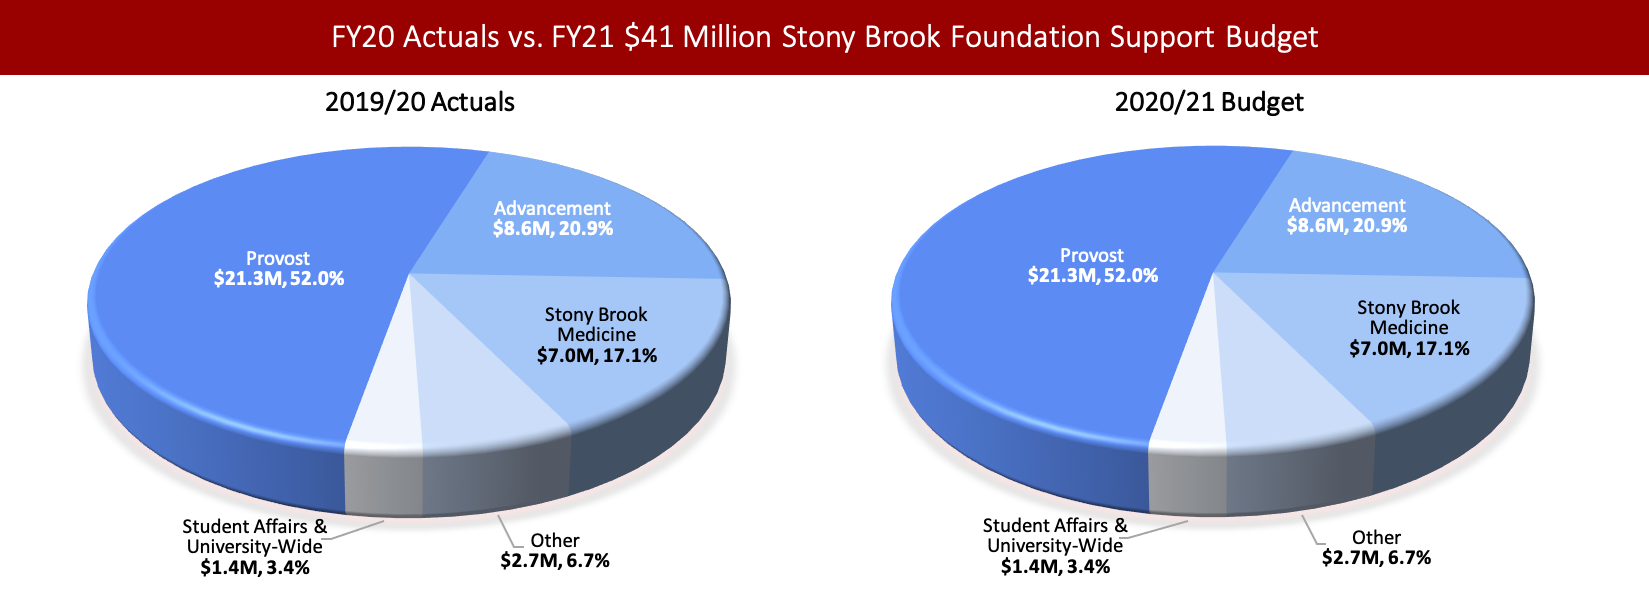 Both charts (FY20 and FY 21) show a breakdown of the $41.0 Million Stony Brook Foundation Support as follows:  Provost: $21.3M, Advancement: $8.6M, Stony Brook Medicine: $7.0M, Other: $2.7M, Student Affairs & University-Wide: $1.4M. 